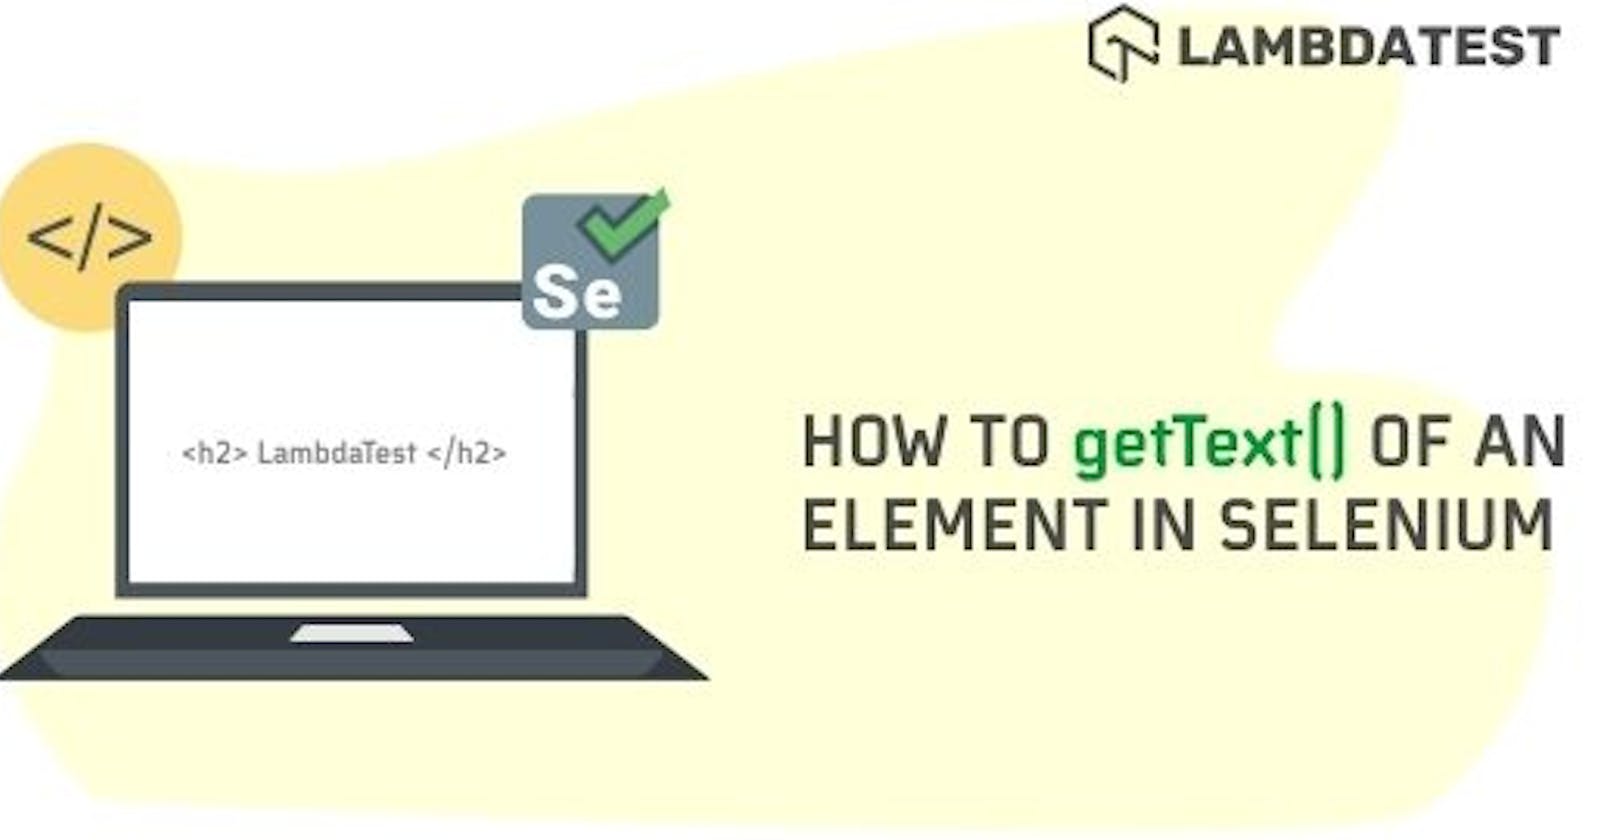 How To Get Text Of An Element In Selenium?